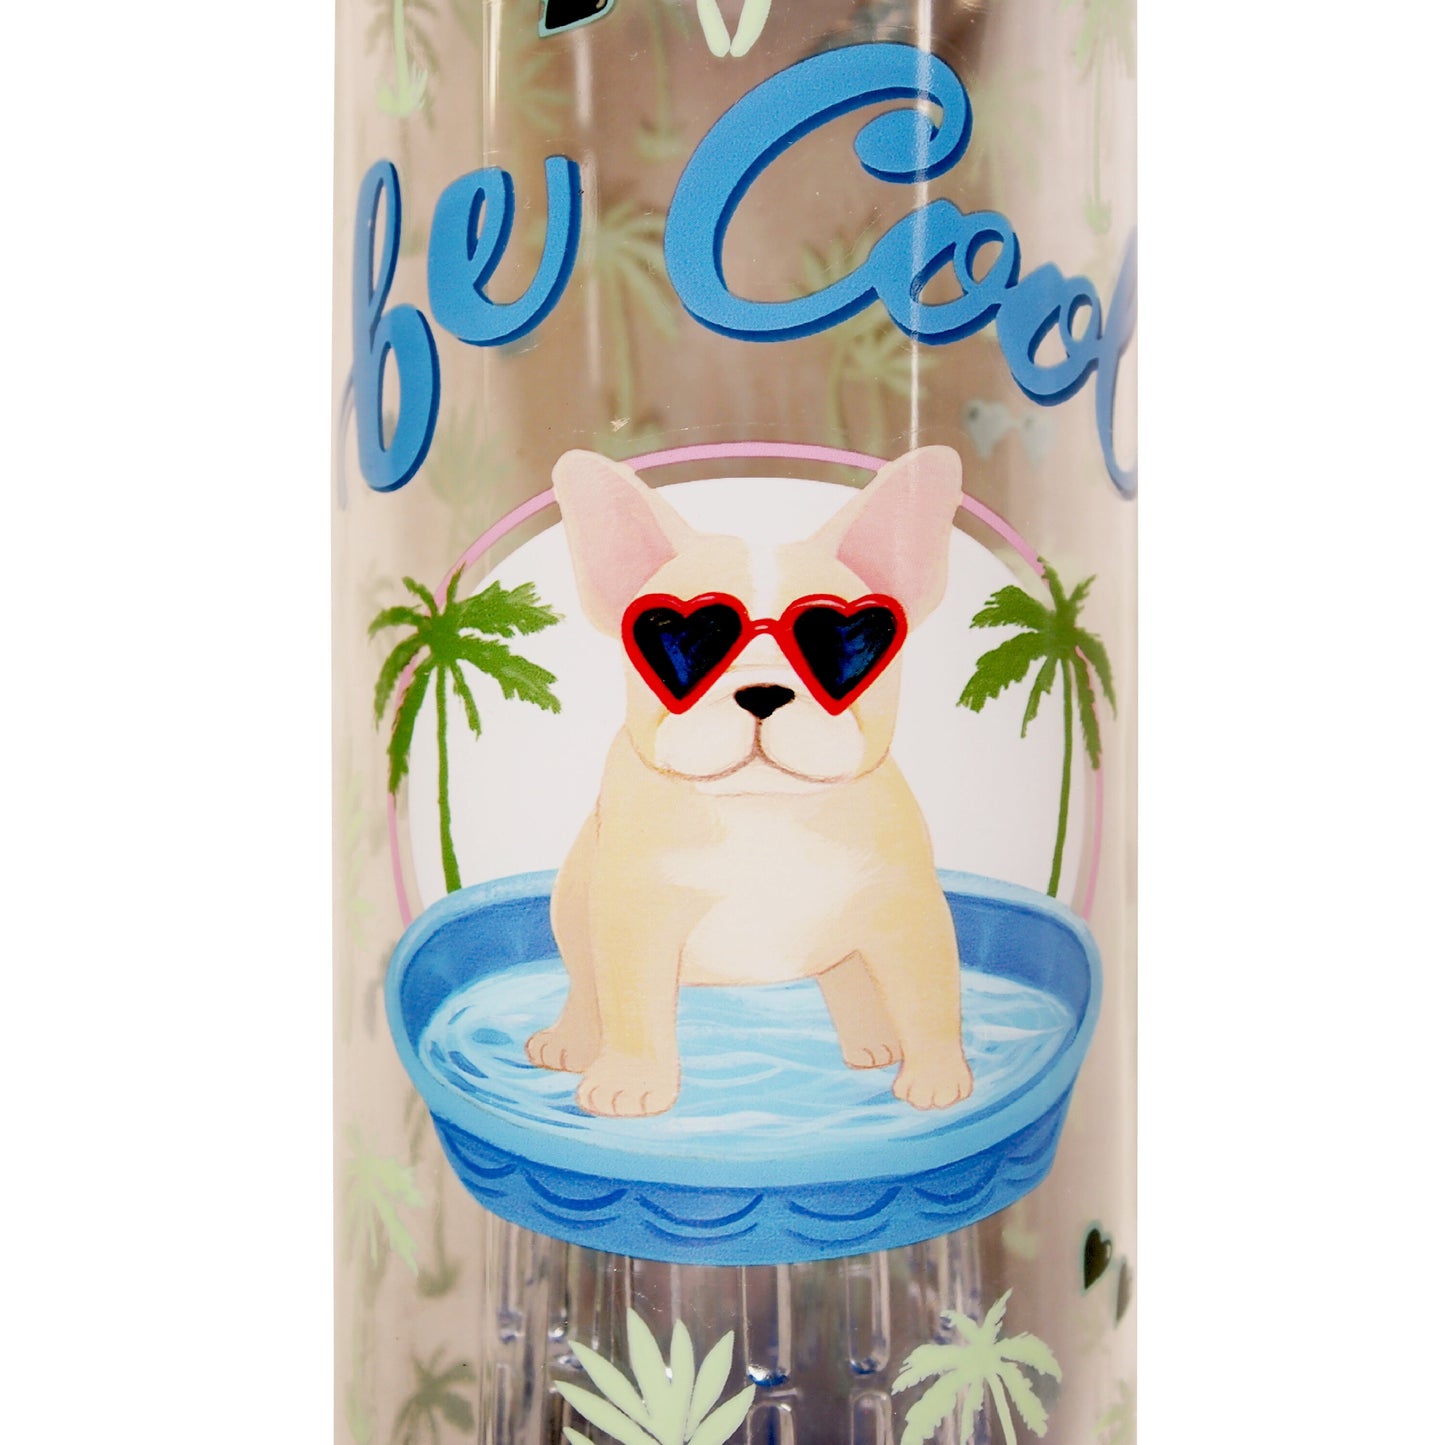 Molly & Rex : "Be Cool" Hydration Bottle with Infuser - eco friendly - Frenchie with Heart Sunglasses